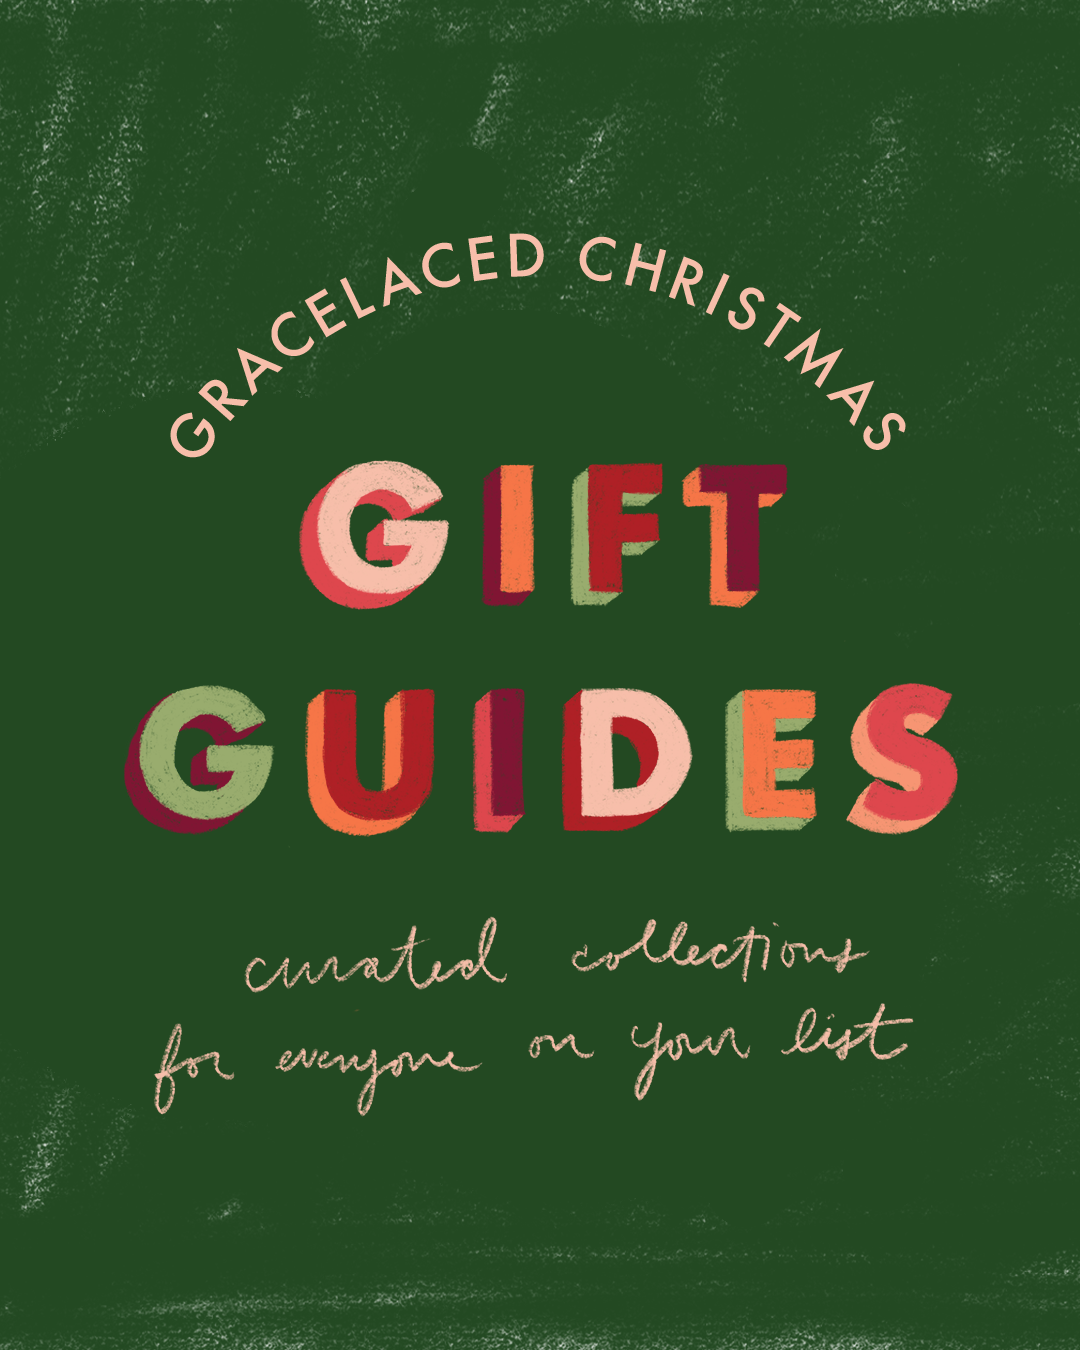 2020 GraceLaced Gift Guides